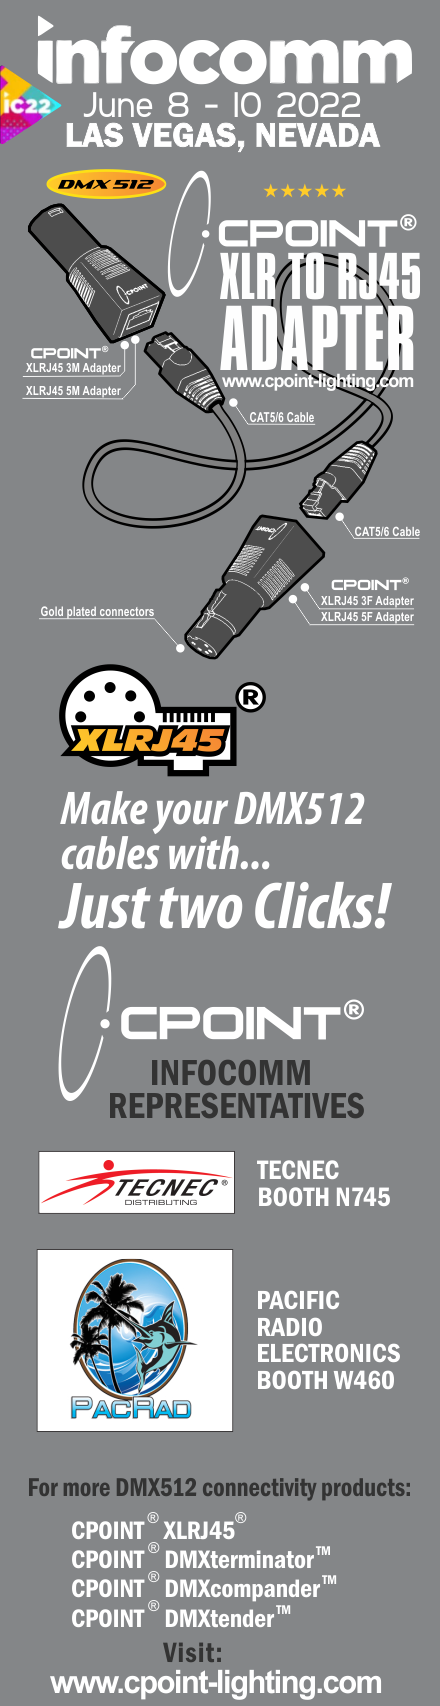 CPOINT® XLRJ45®- XLR to RJ45 adapter at NAB